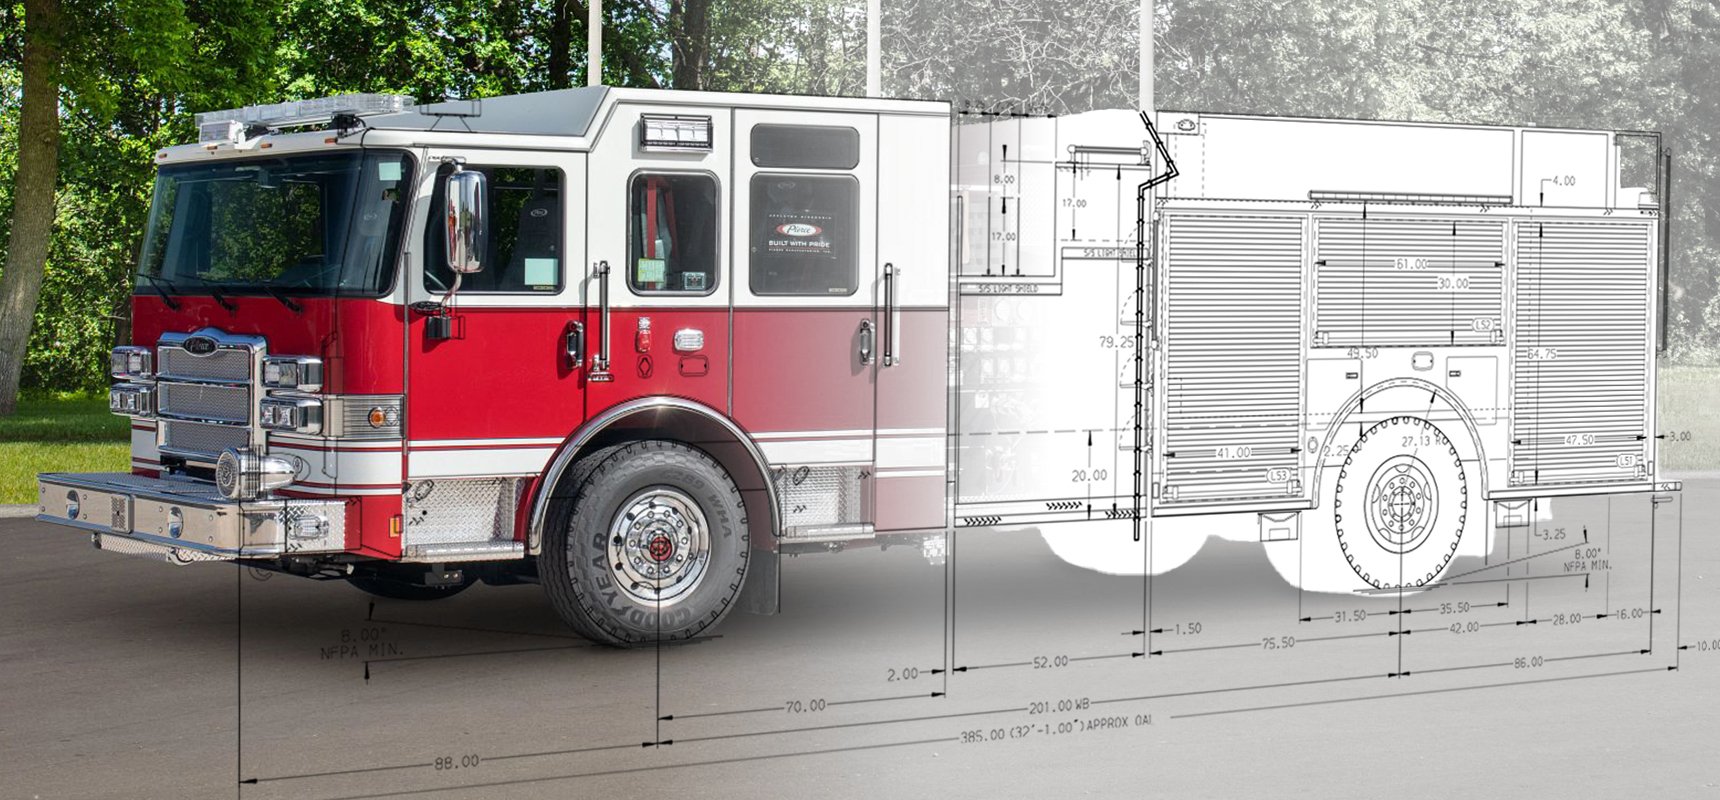 Red fire truck photo next to a schematic of a fire truck.